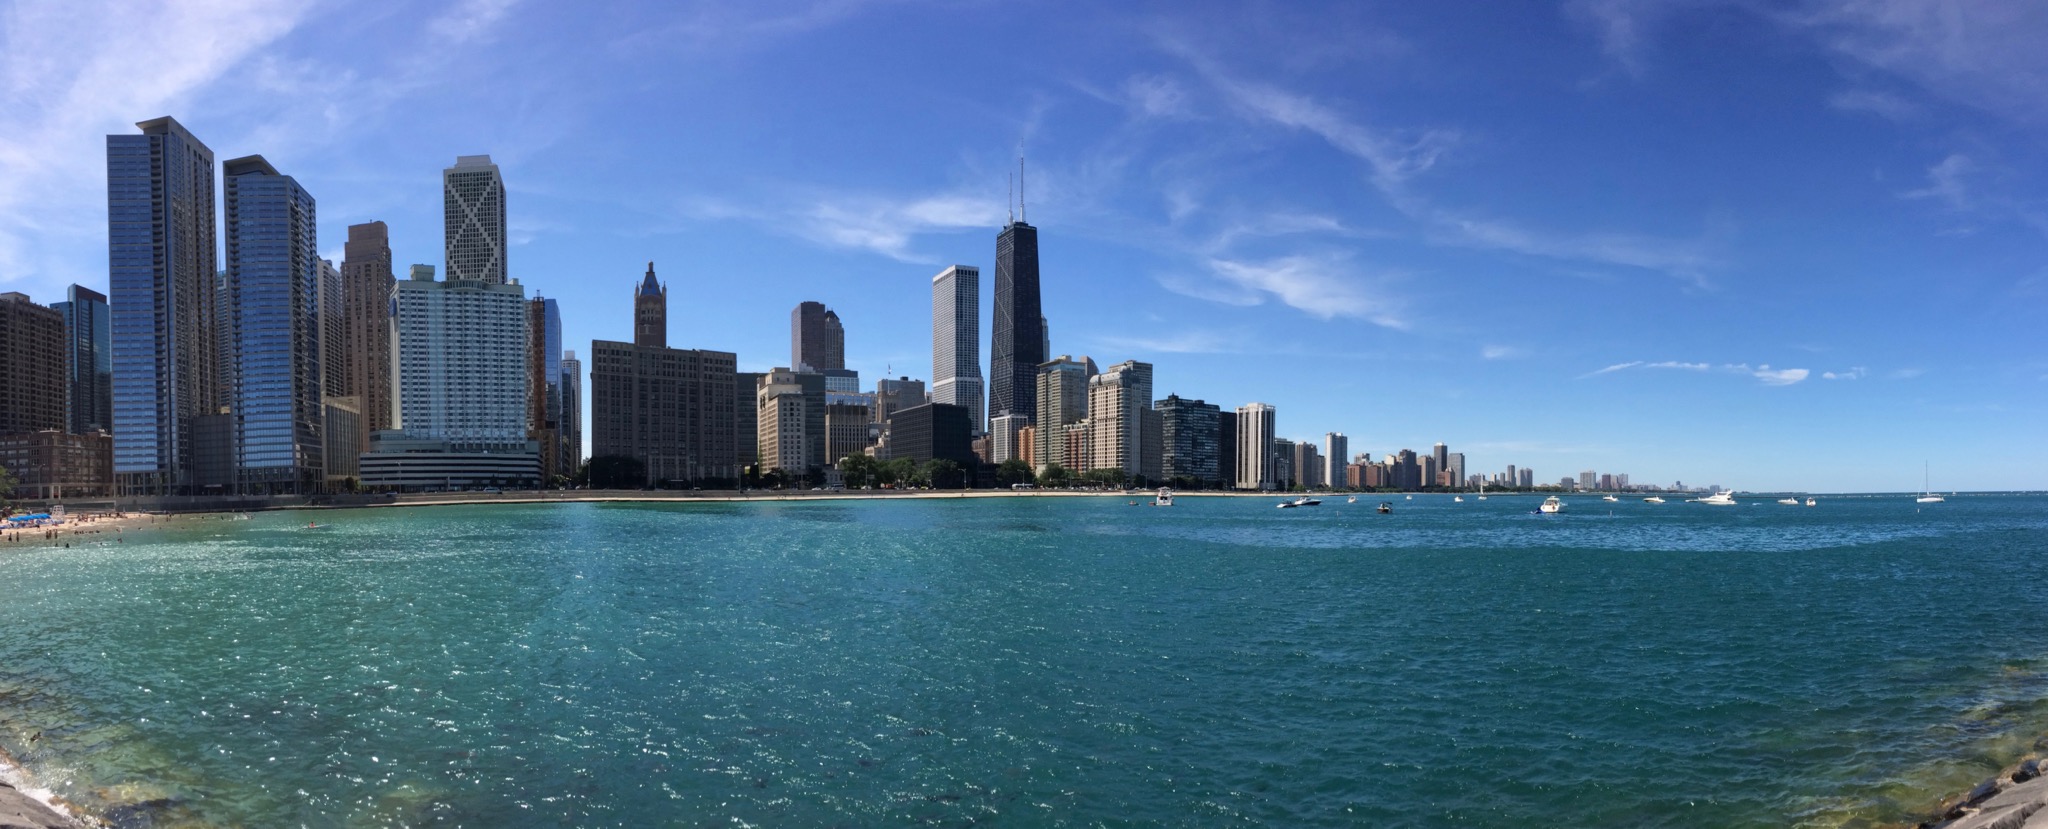 Photo 98 of 135 from the album Highlights Chicago 2015.